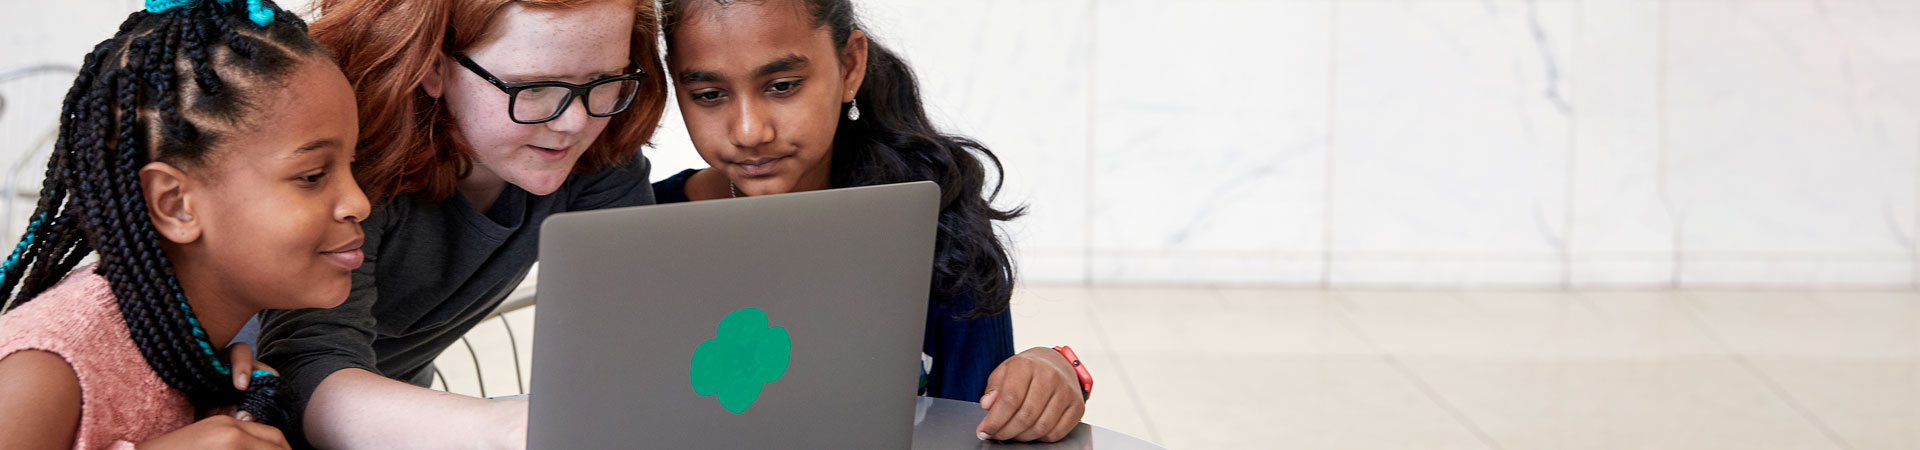  Three Girl Scouts examine an open gray laptop with a green Trefoil on the back. 